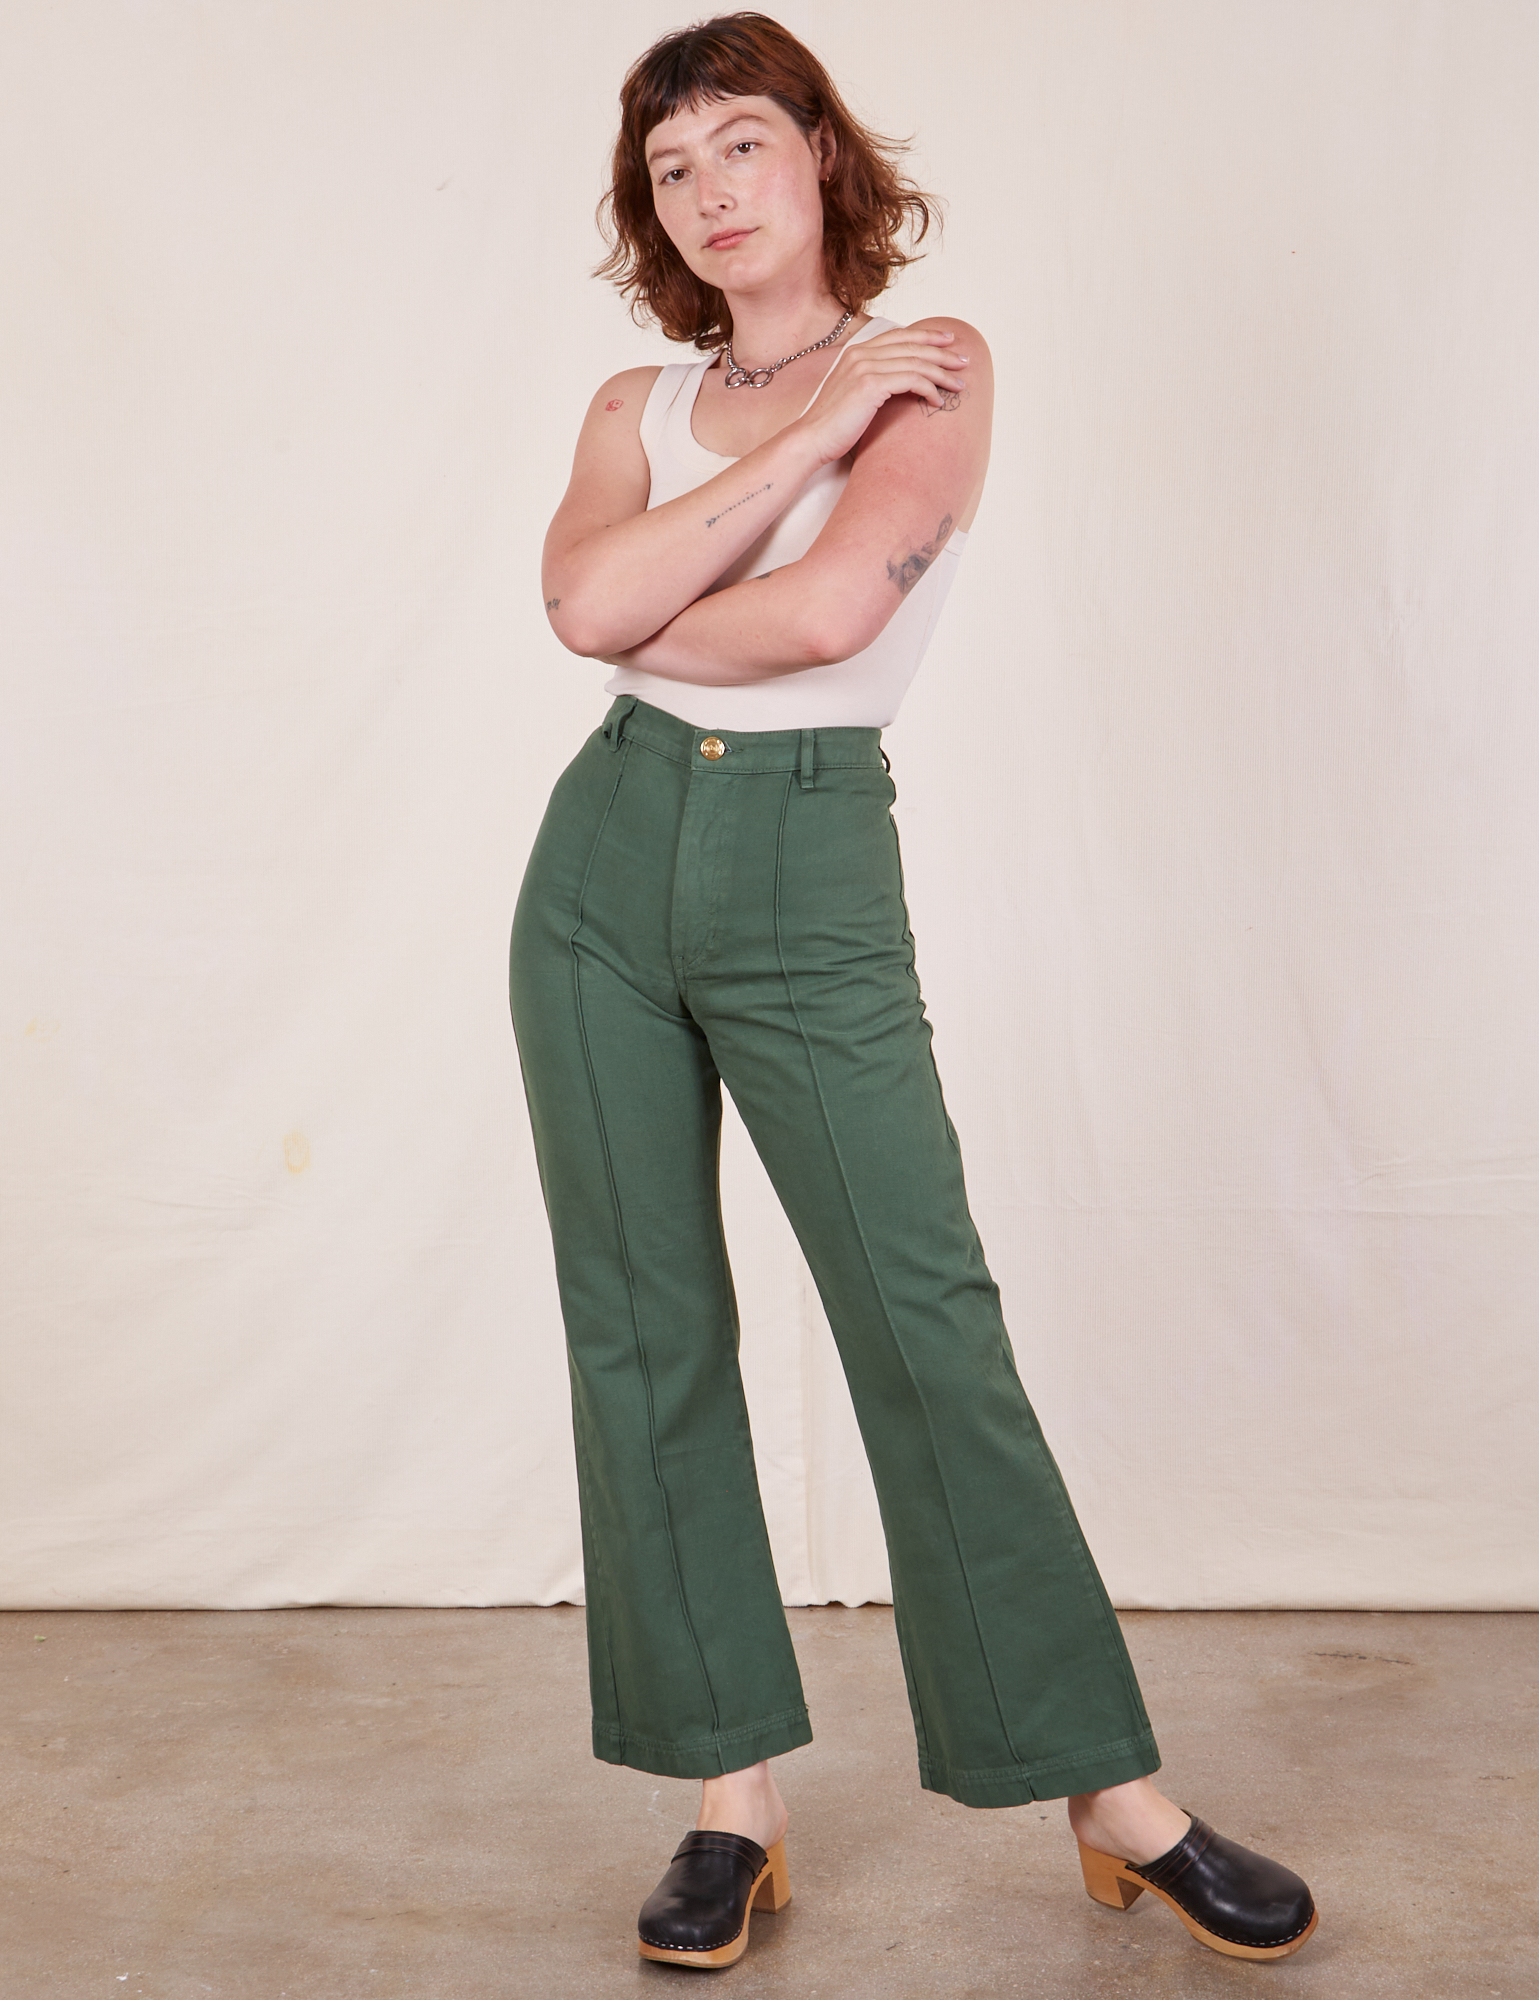 70s Emerald Green Flared Side Zip Pants - Extra Small, 25